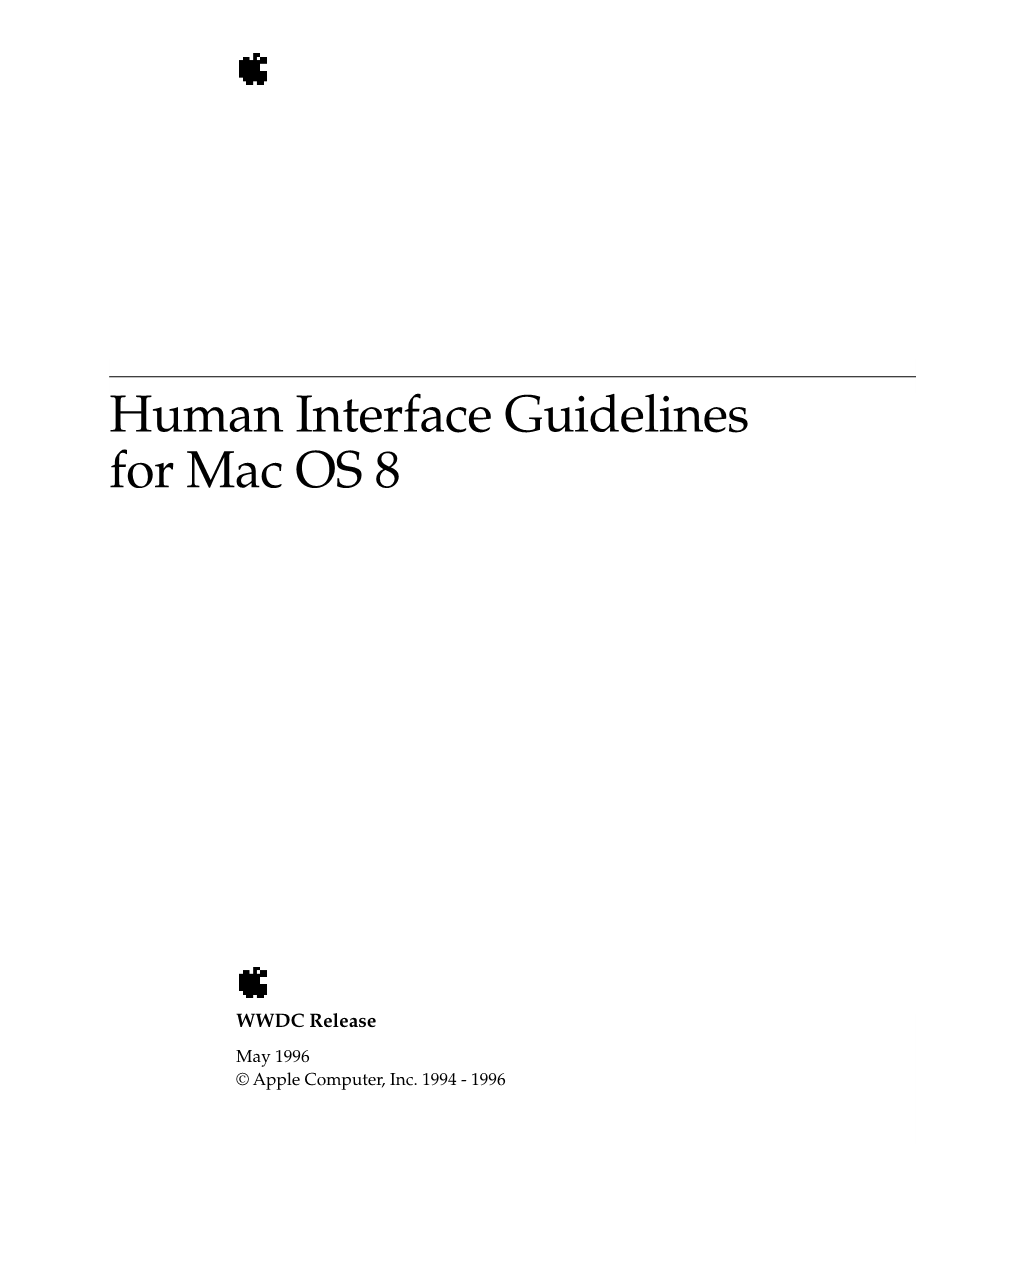 Human Interface Guidelines for Mac OS 8